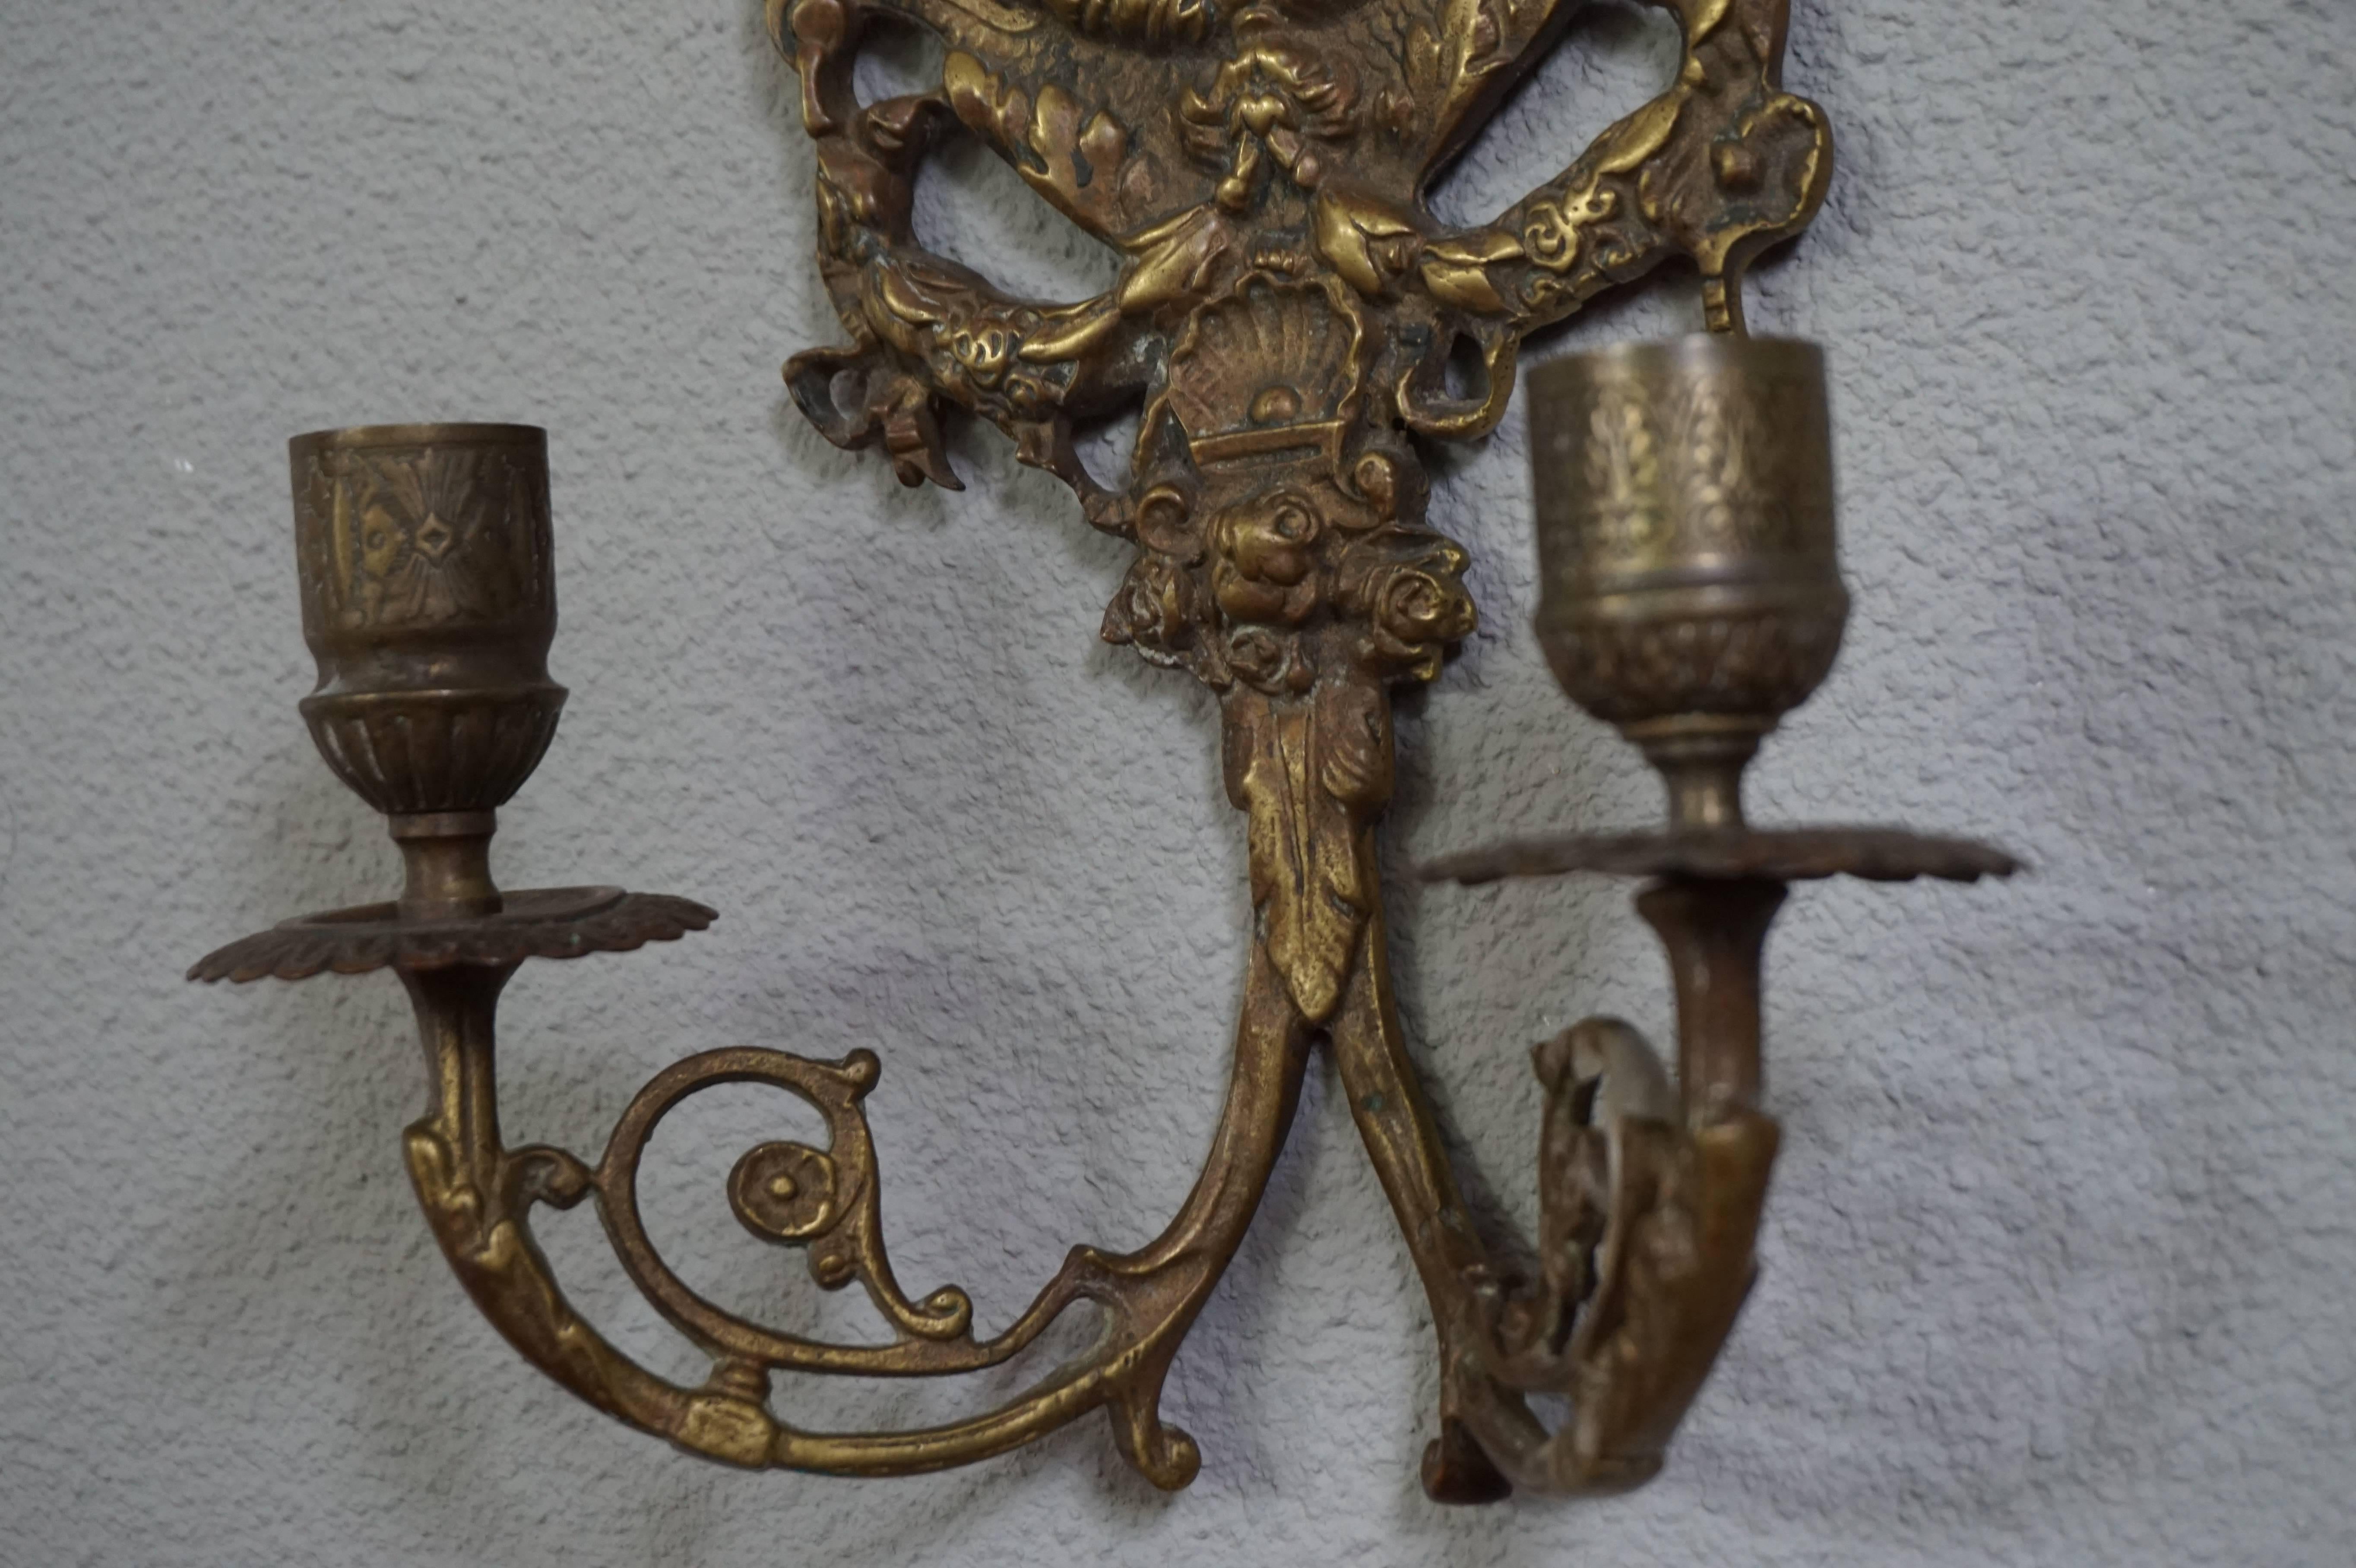 19th Century Antique Pair of Cast Bronze Wall Sconces / Candelabras with Oval Beveled Mirrors